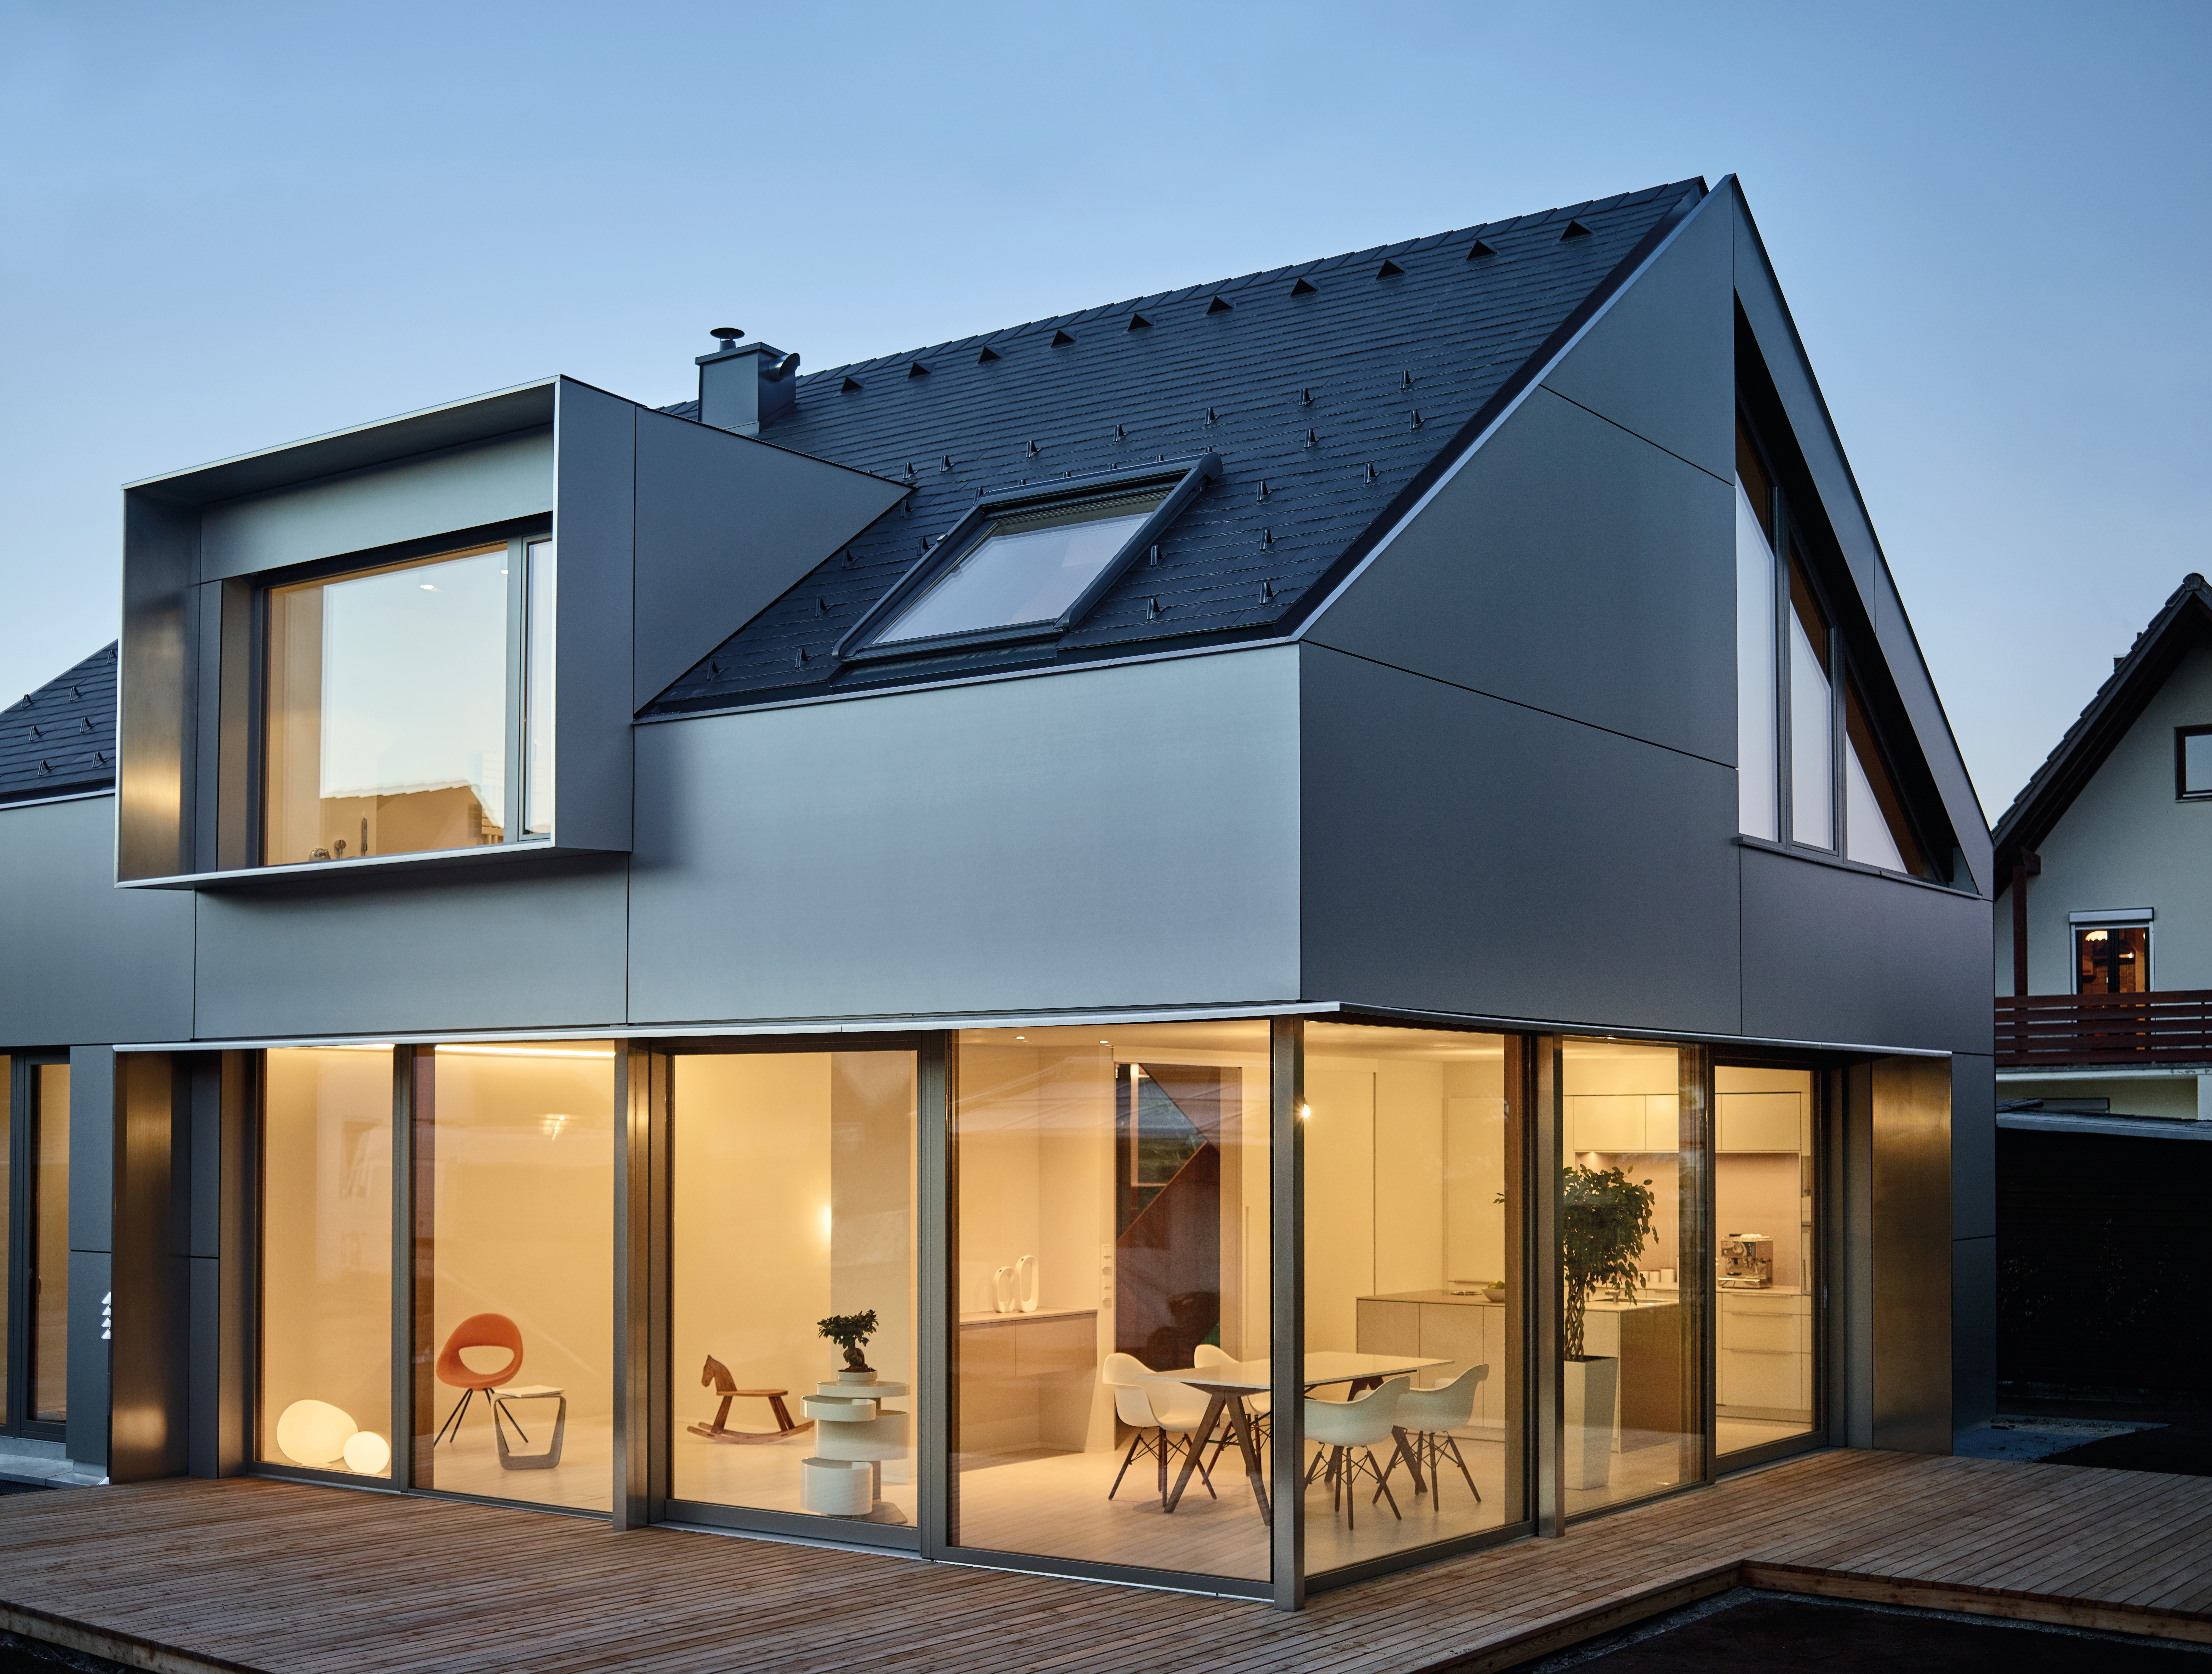 The single-family home is characterised by its open and modern architecture. 